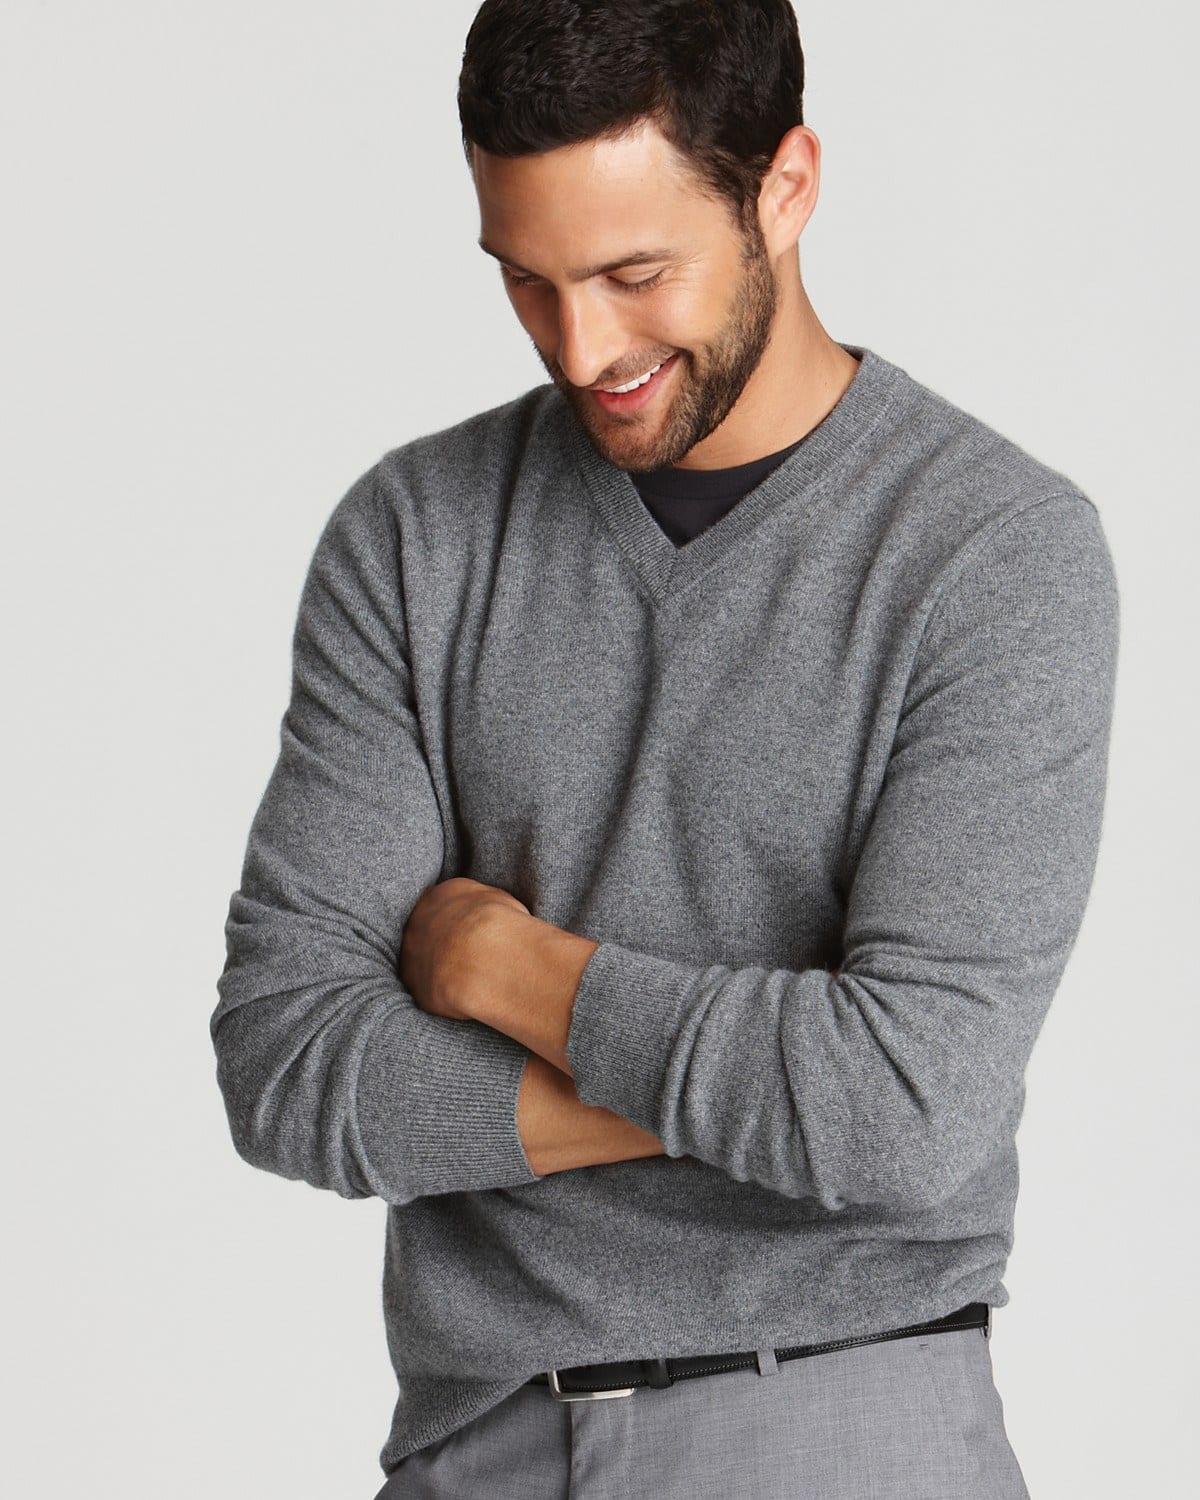 Sweater Outfits for Men – 17 Ideas How to Wear Sweaters